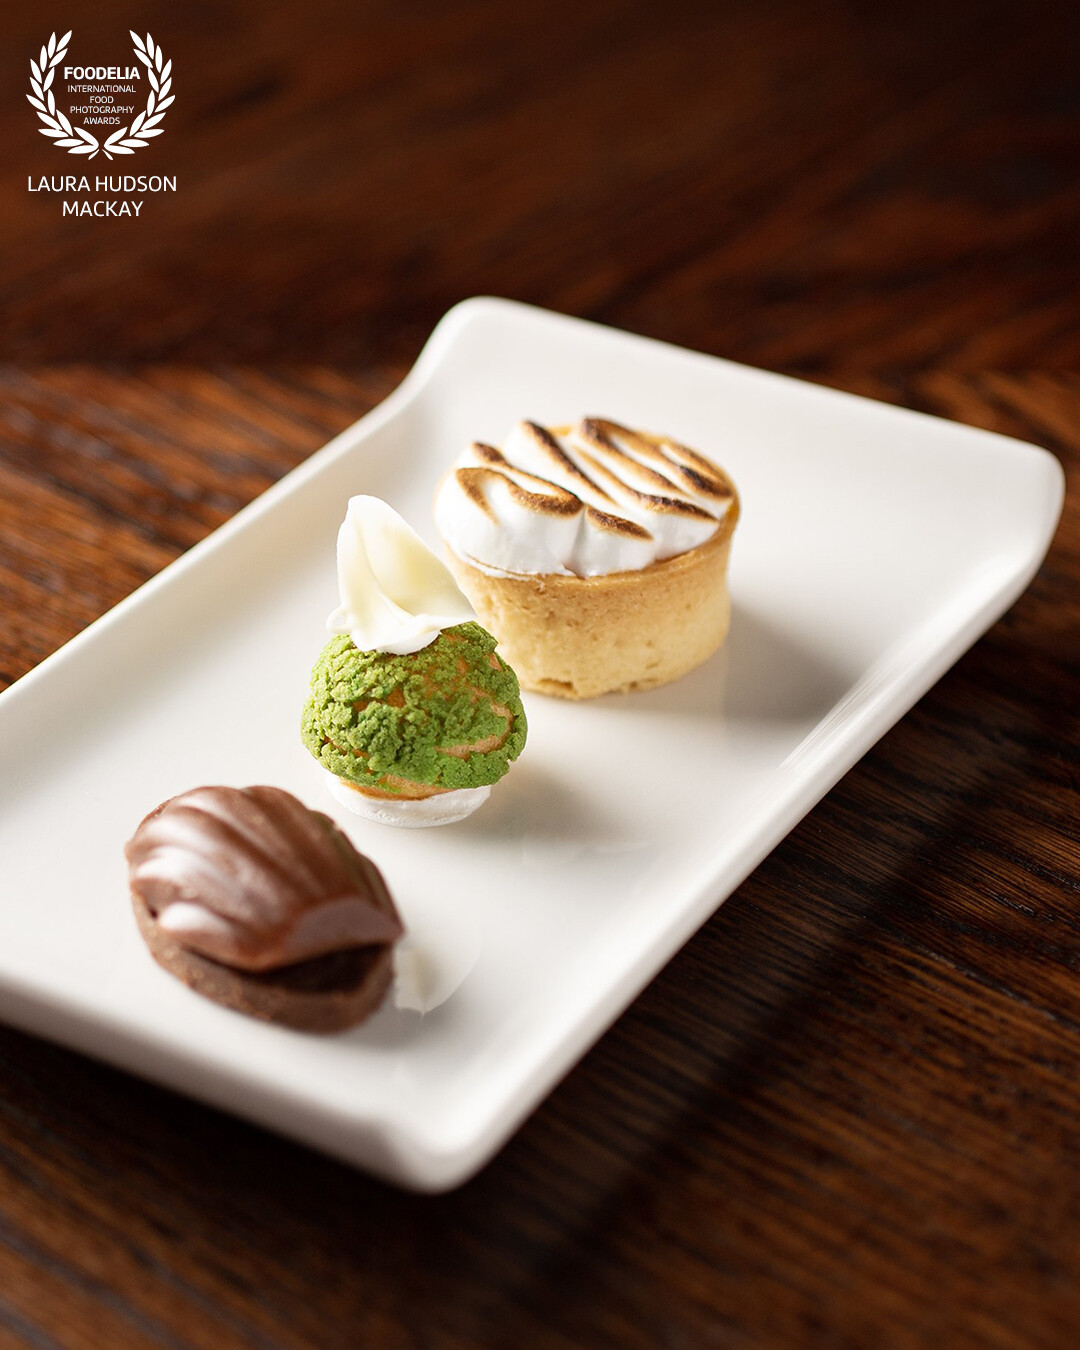 Passionfruit meringue pie, pistachio choux and salted caramel and peat fudge. A trio of delicious treats presented by the chefs at The Globe Inn, Dumfries, Scotland